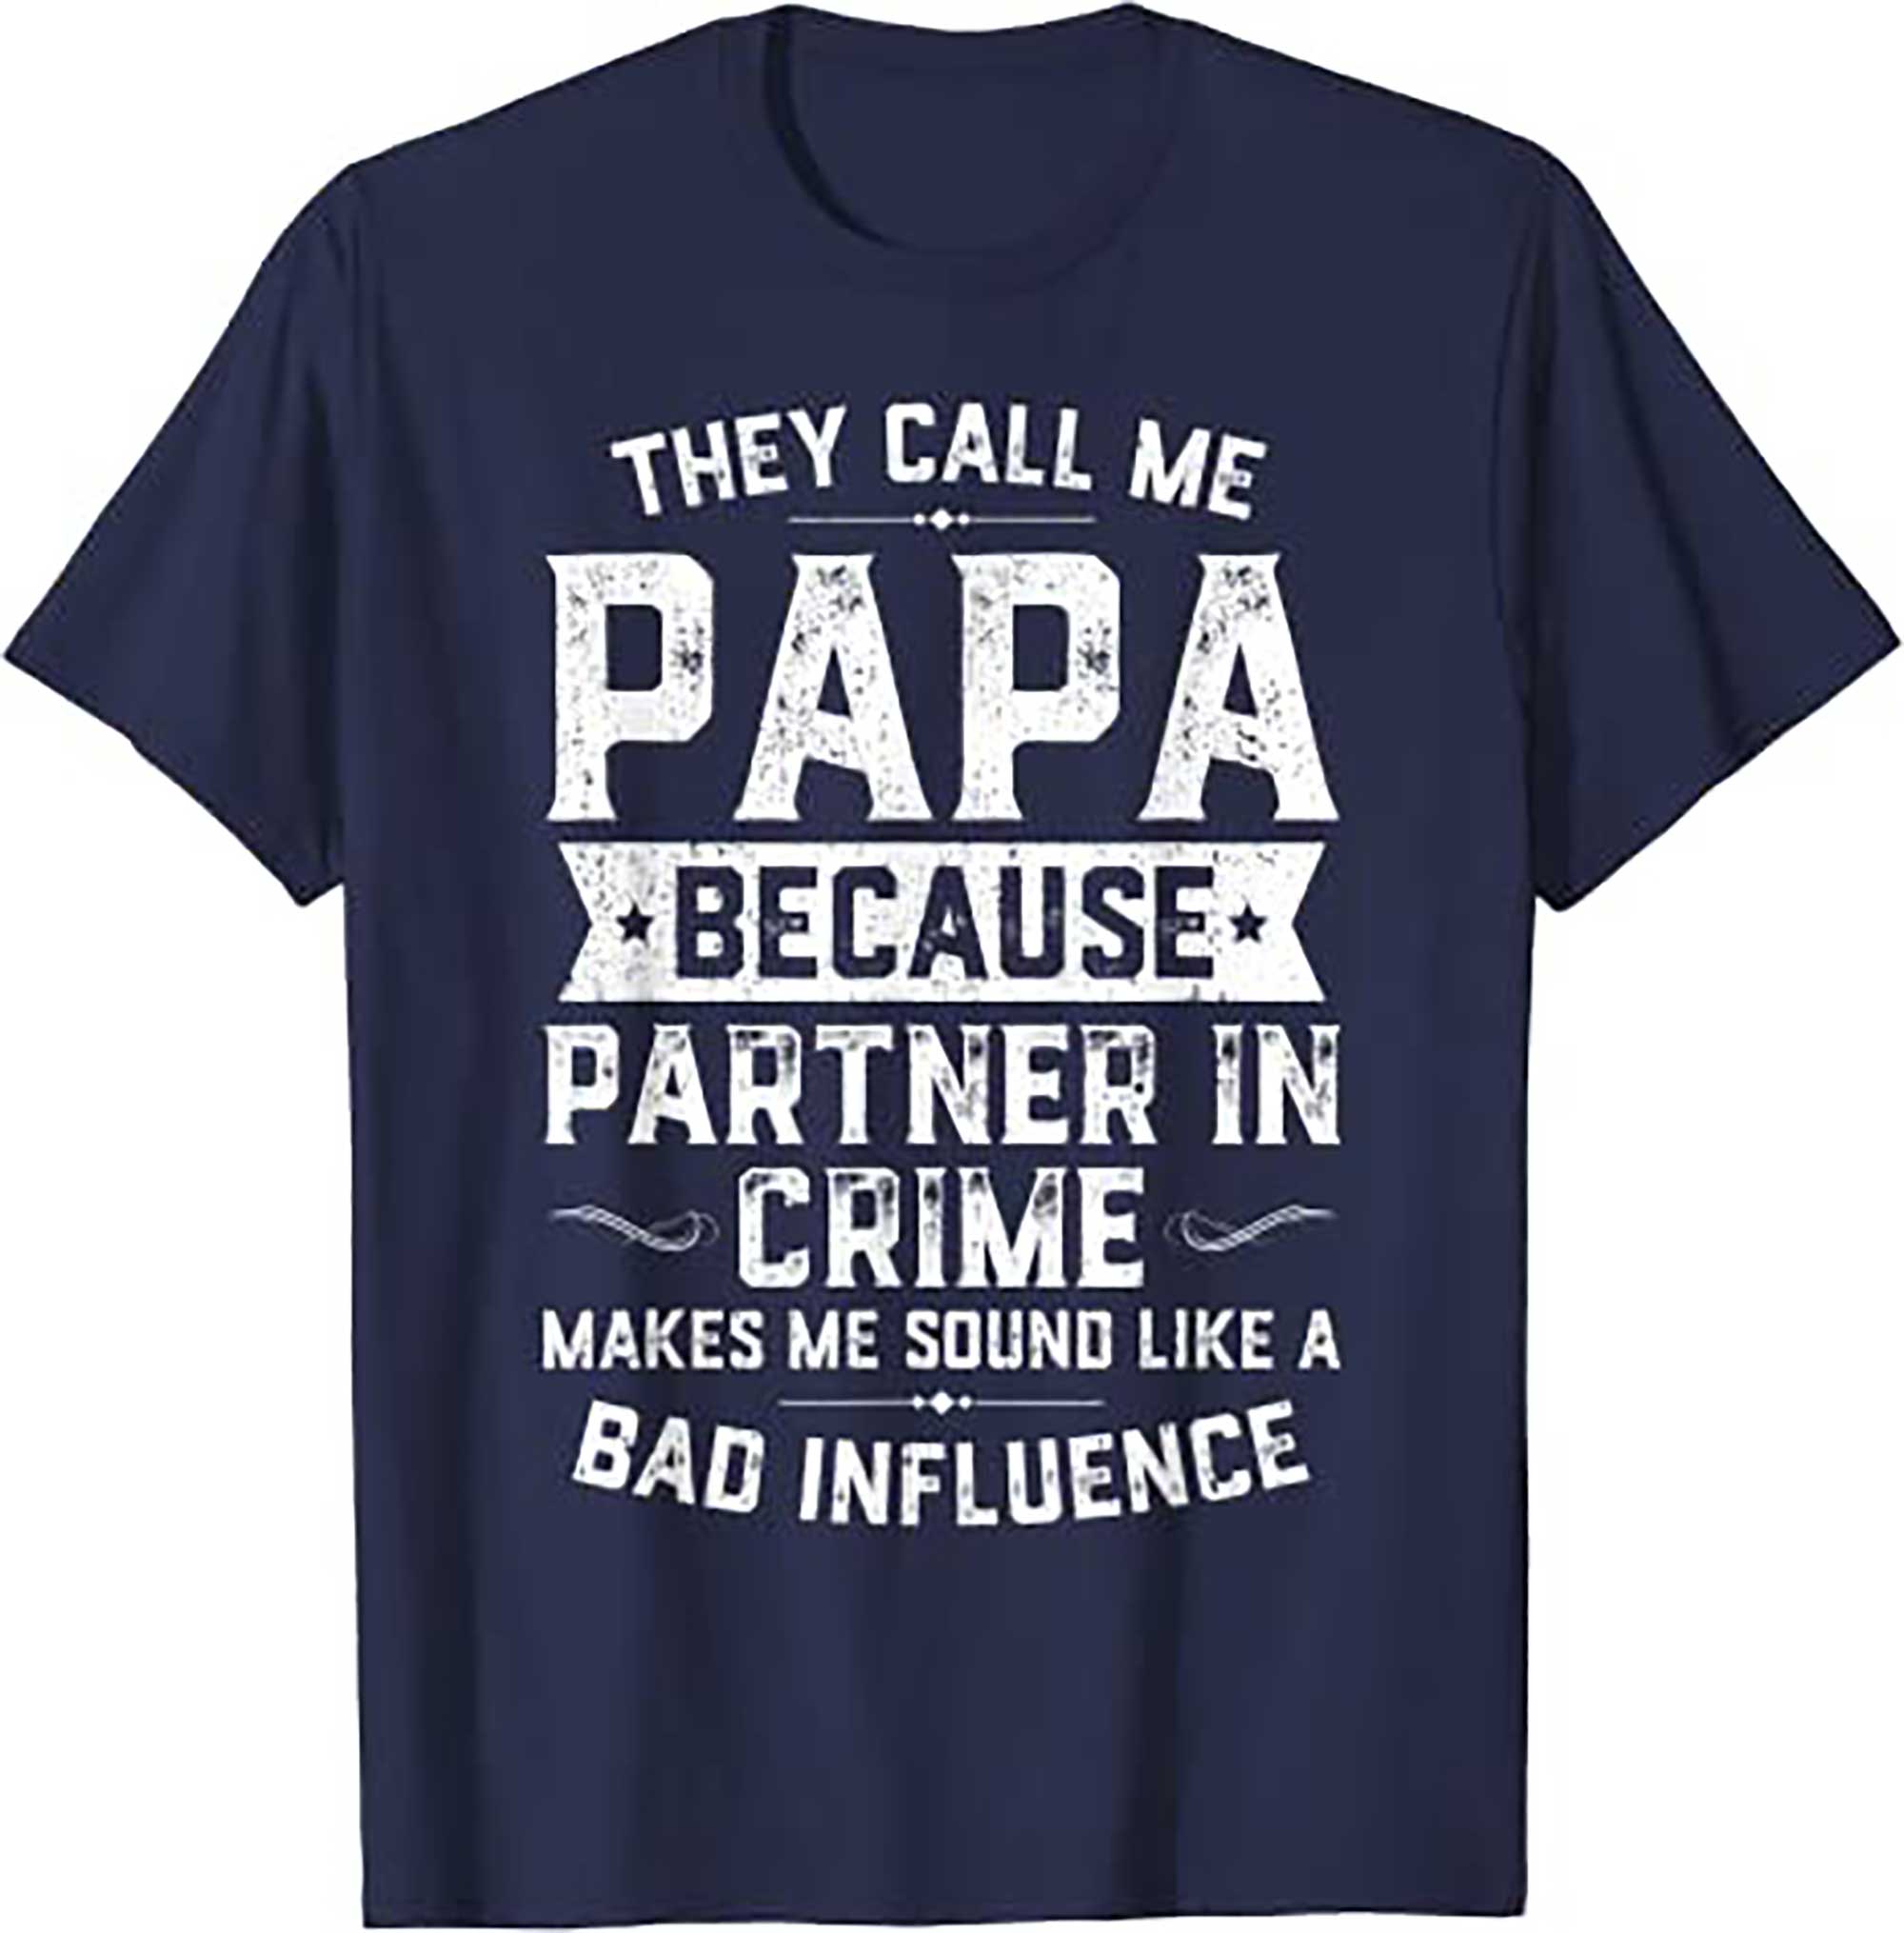 Skitongift They Call Me Papa Because Partner In Crime Shirt Fathers Day T Shirt